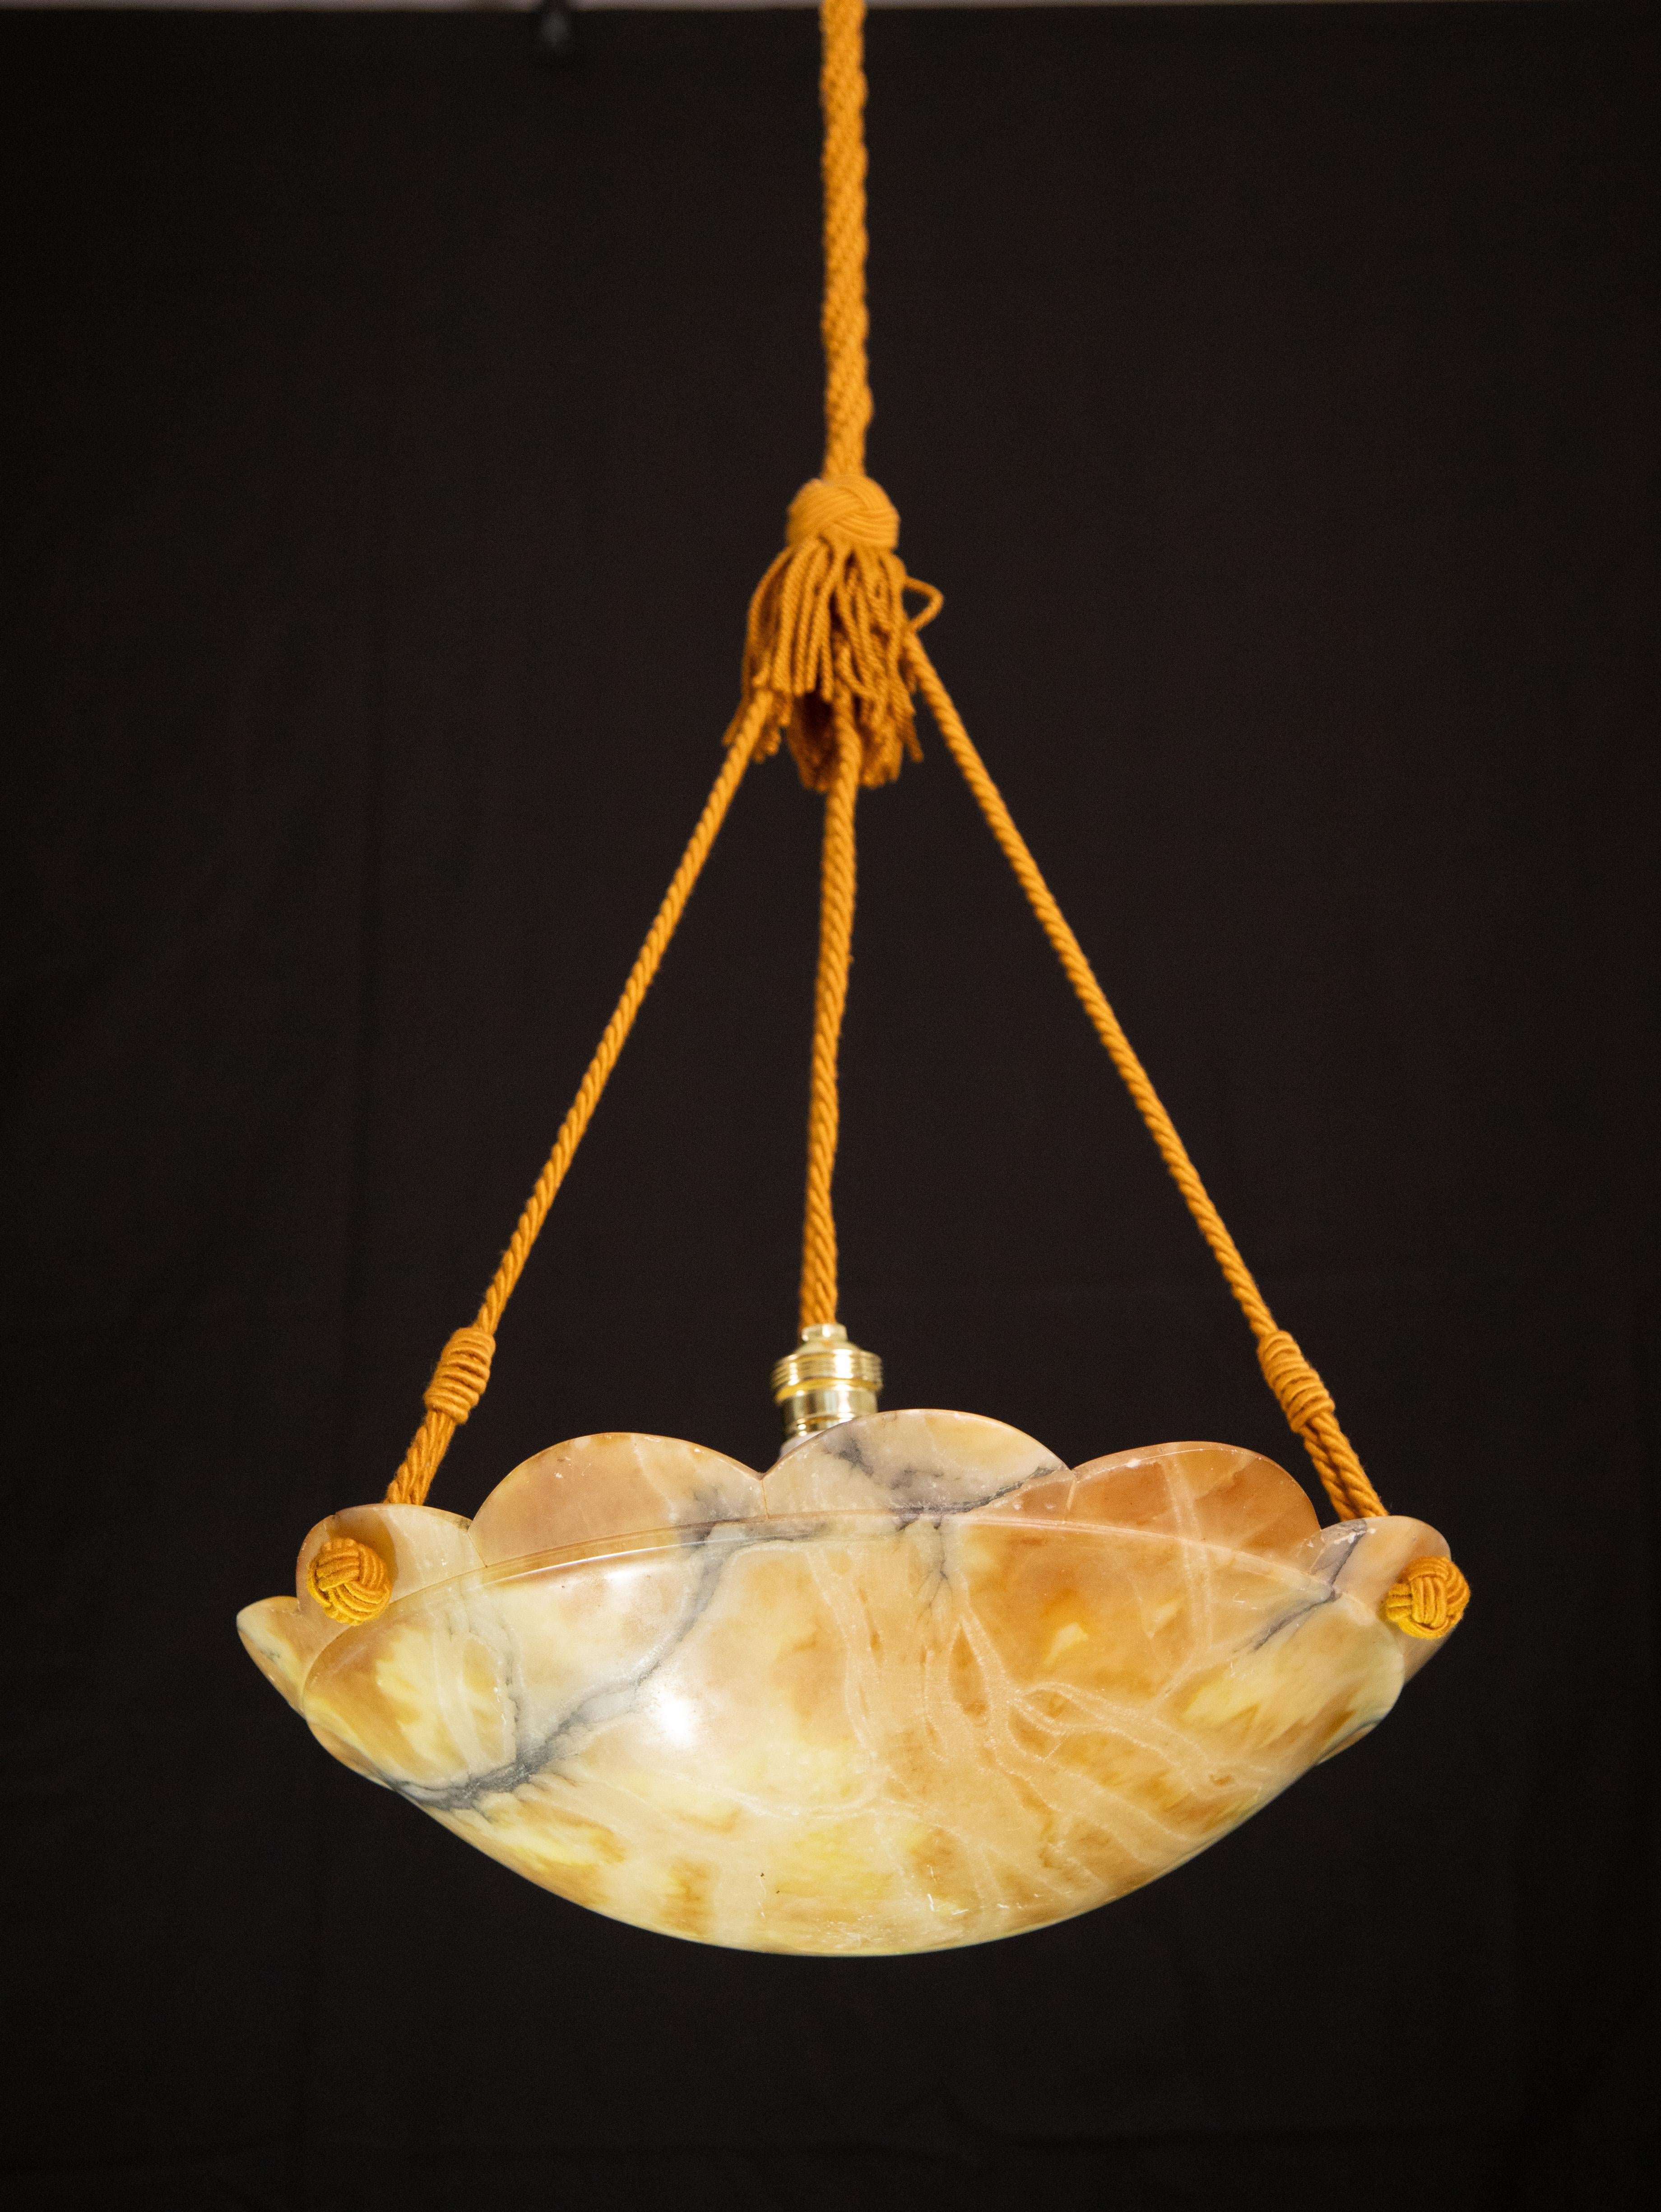 Antique orange alabaster hanging chandelier in Art Deco style, circa 1950s.
A unique piece in orange alabaster, beautifully worked with hues and reflections of other colors when lit, still suspended from the three original chains.
The light that